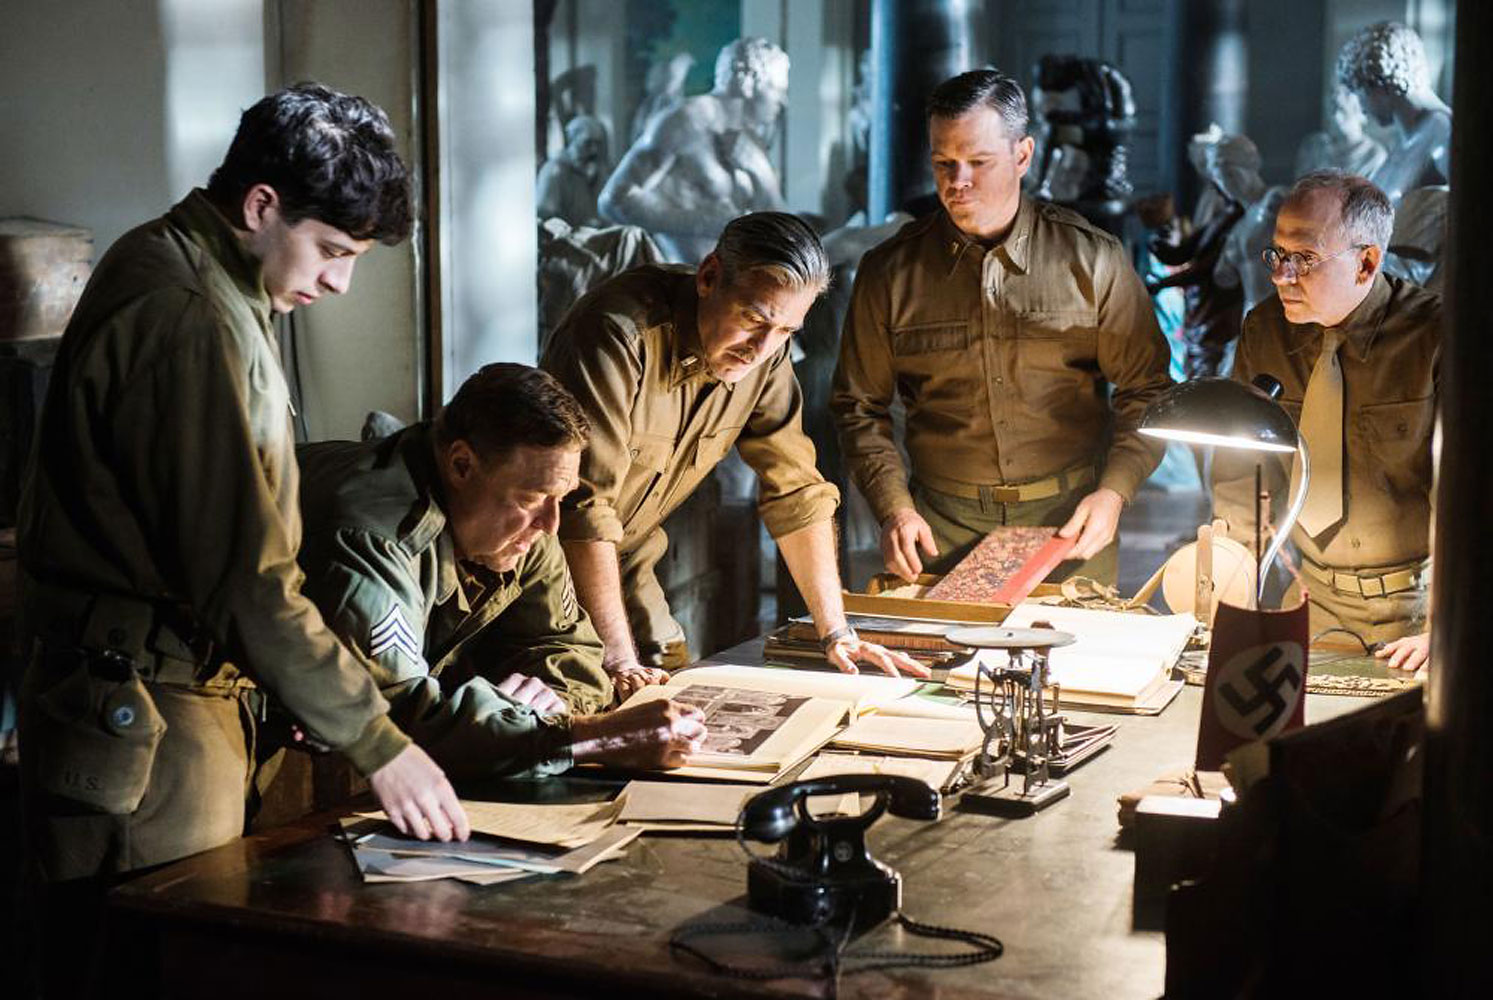 George Clooney’s newest film, <i>Monuments Men</i>, follows the exploits of an Allied platoon of seven “Monuments Men” who enter Germany during the end of World War II to rescue art stolen by the Nazis. 
                      
                      The movie is based off of the real life “Monuments Men," a group of more than 300 men and women from thirteen countries who worked together to protect and recover the stolen cultural artifacts. Their ranks ranged from museum directors to architects — and they would ultimately help return more than five million artistic and cultural items plundered by the Nazis. (Claudette Barius&mdash;Sony Pictures/)